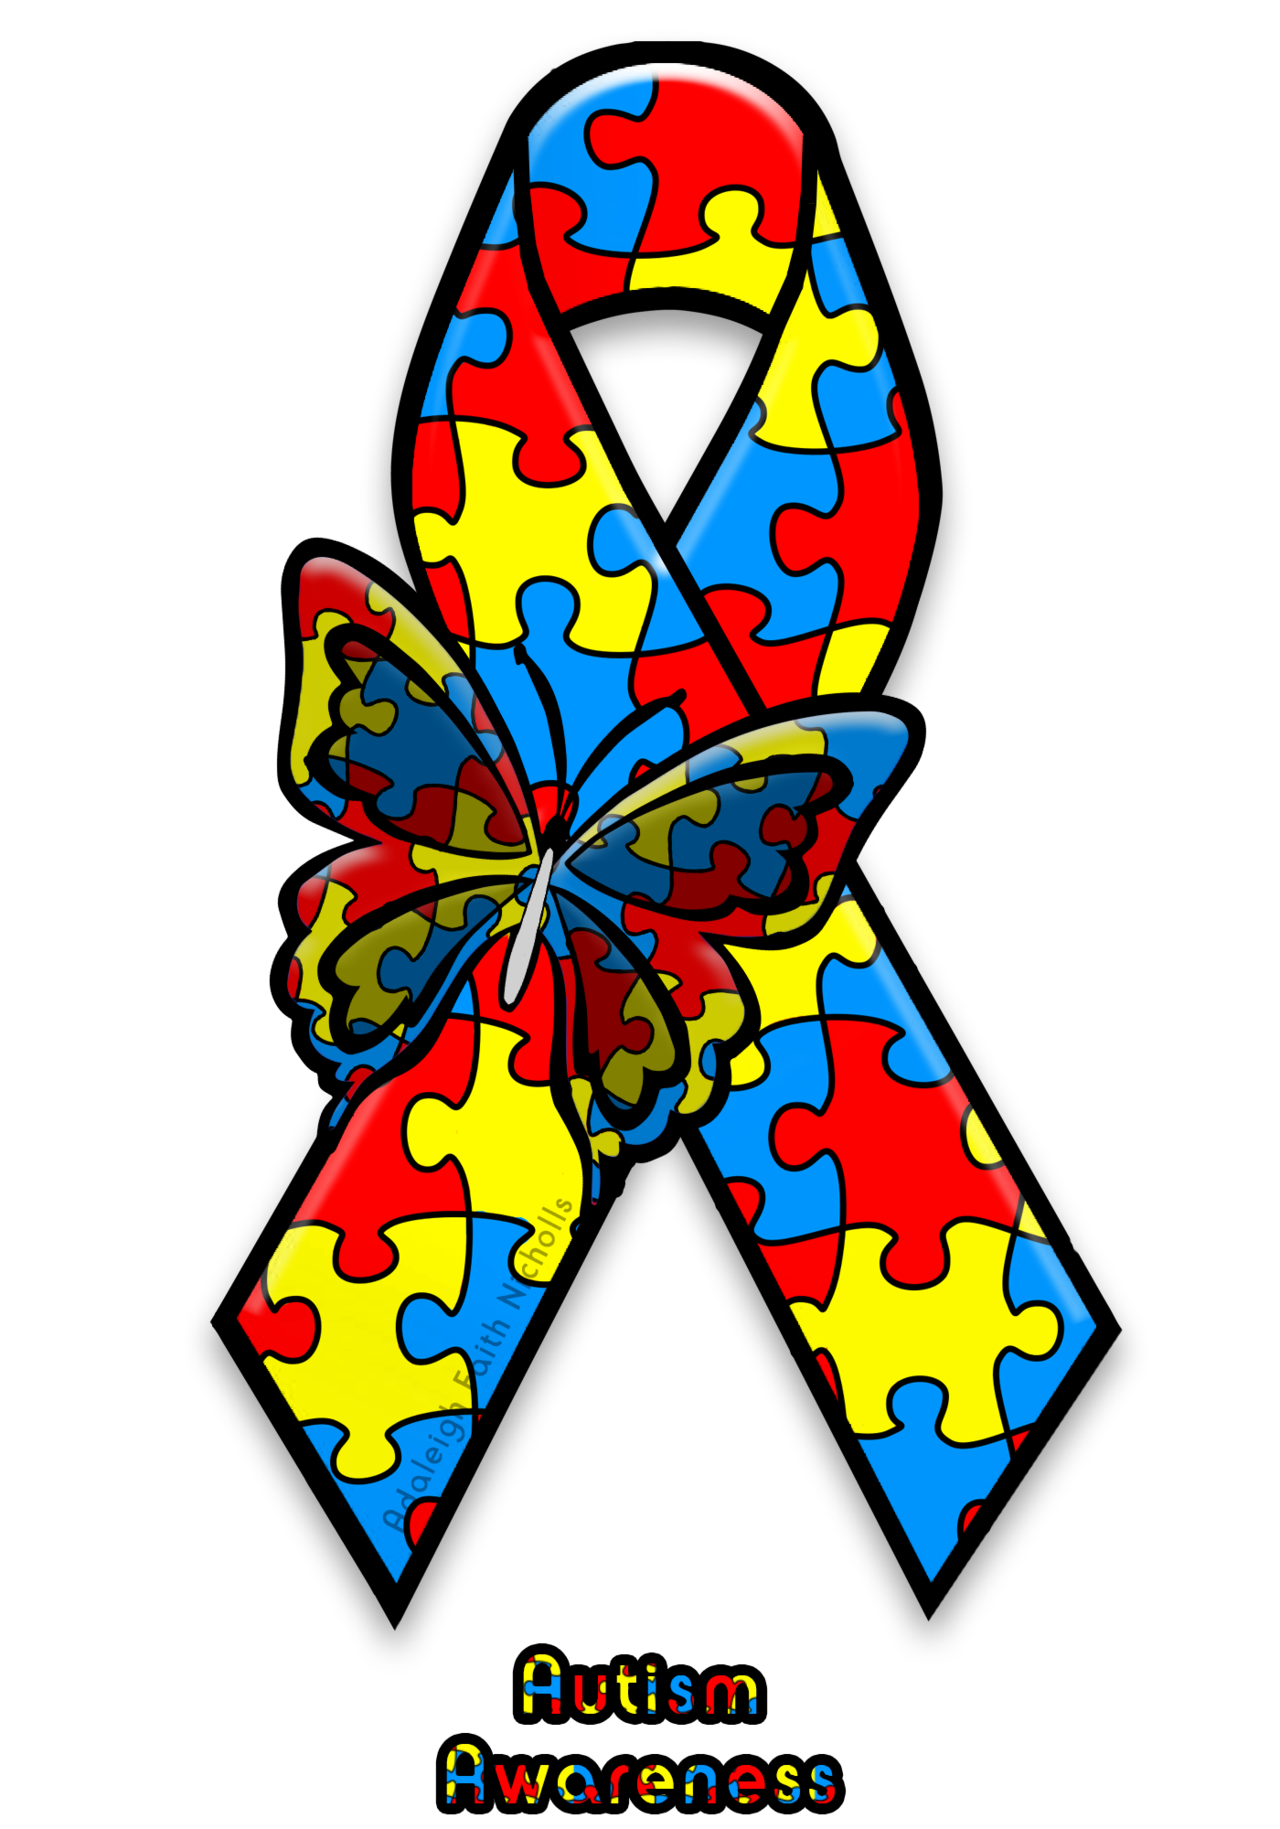 Autism Awareness Related favourites by CelmationPrince on DeviantArt